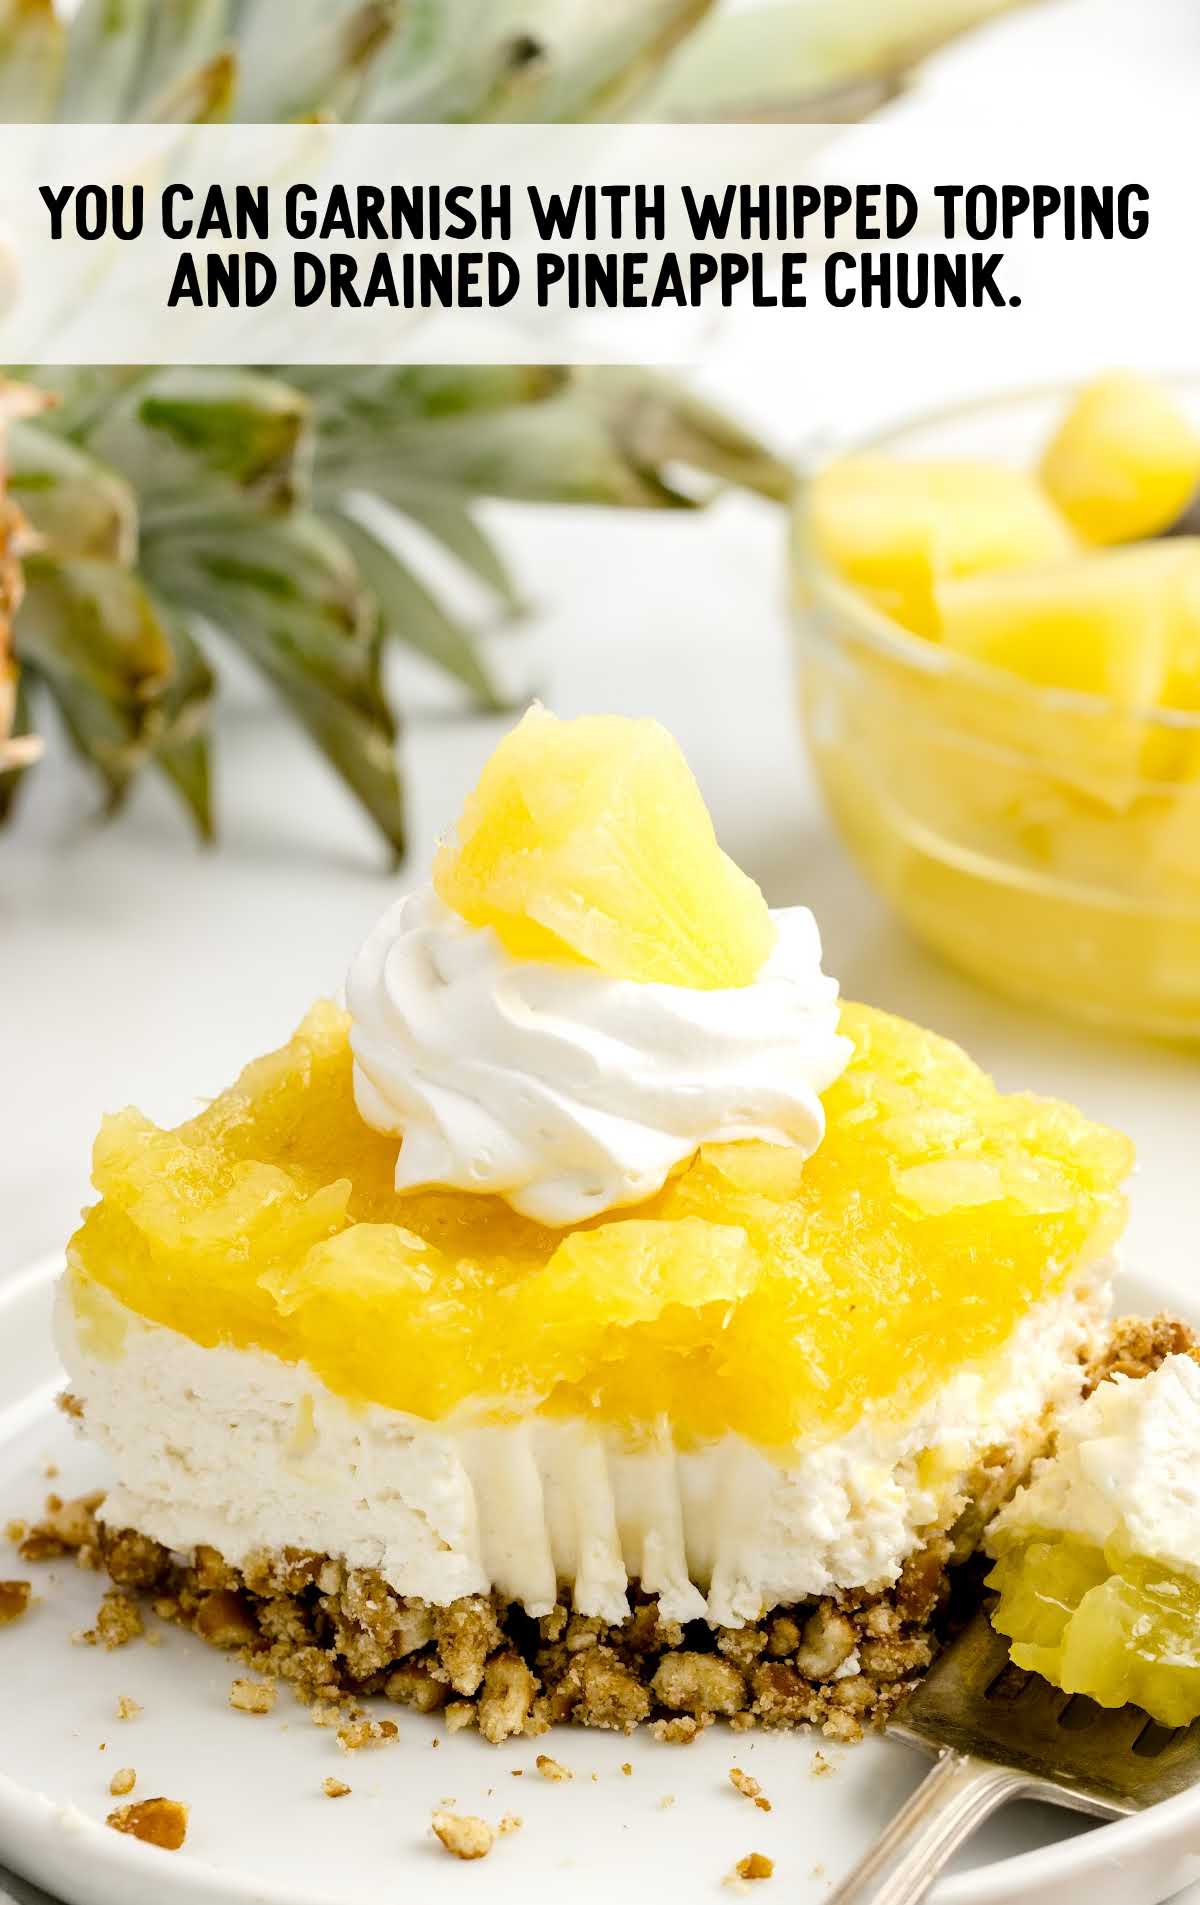 Whipped topping and pineapple chunk garnished